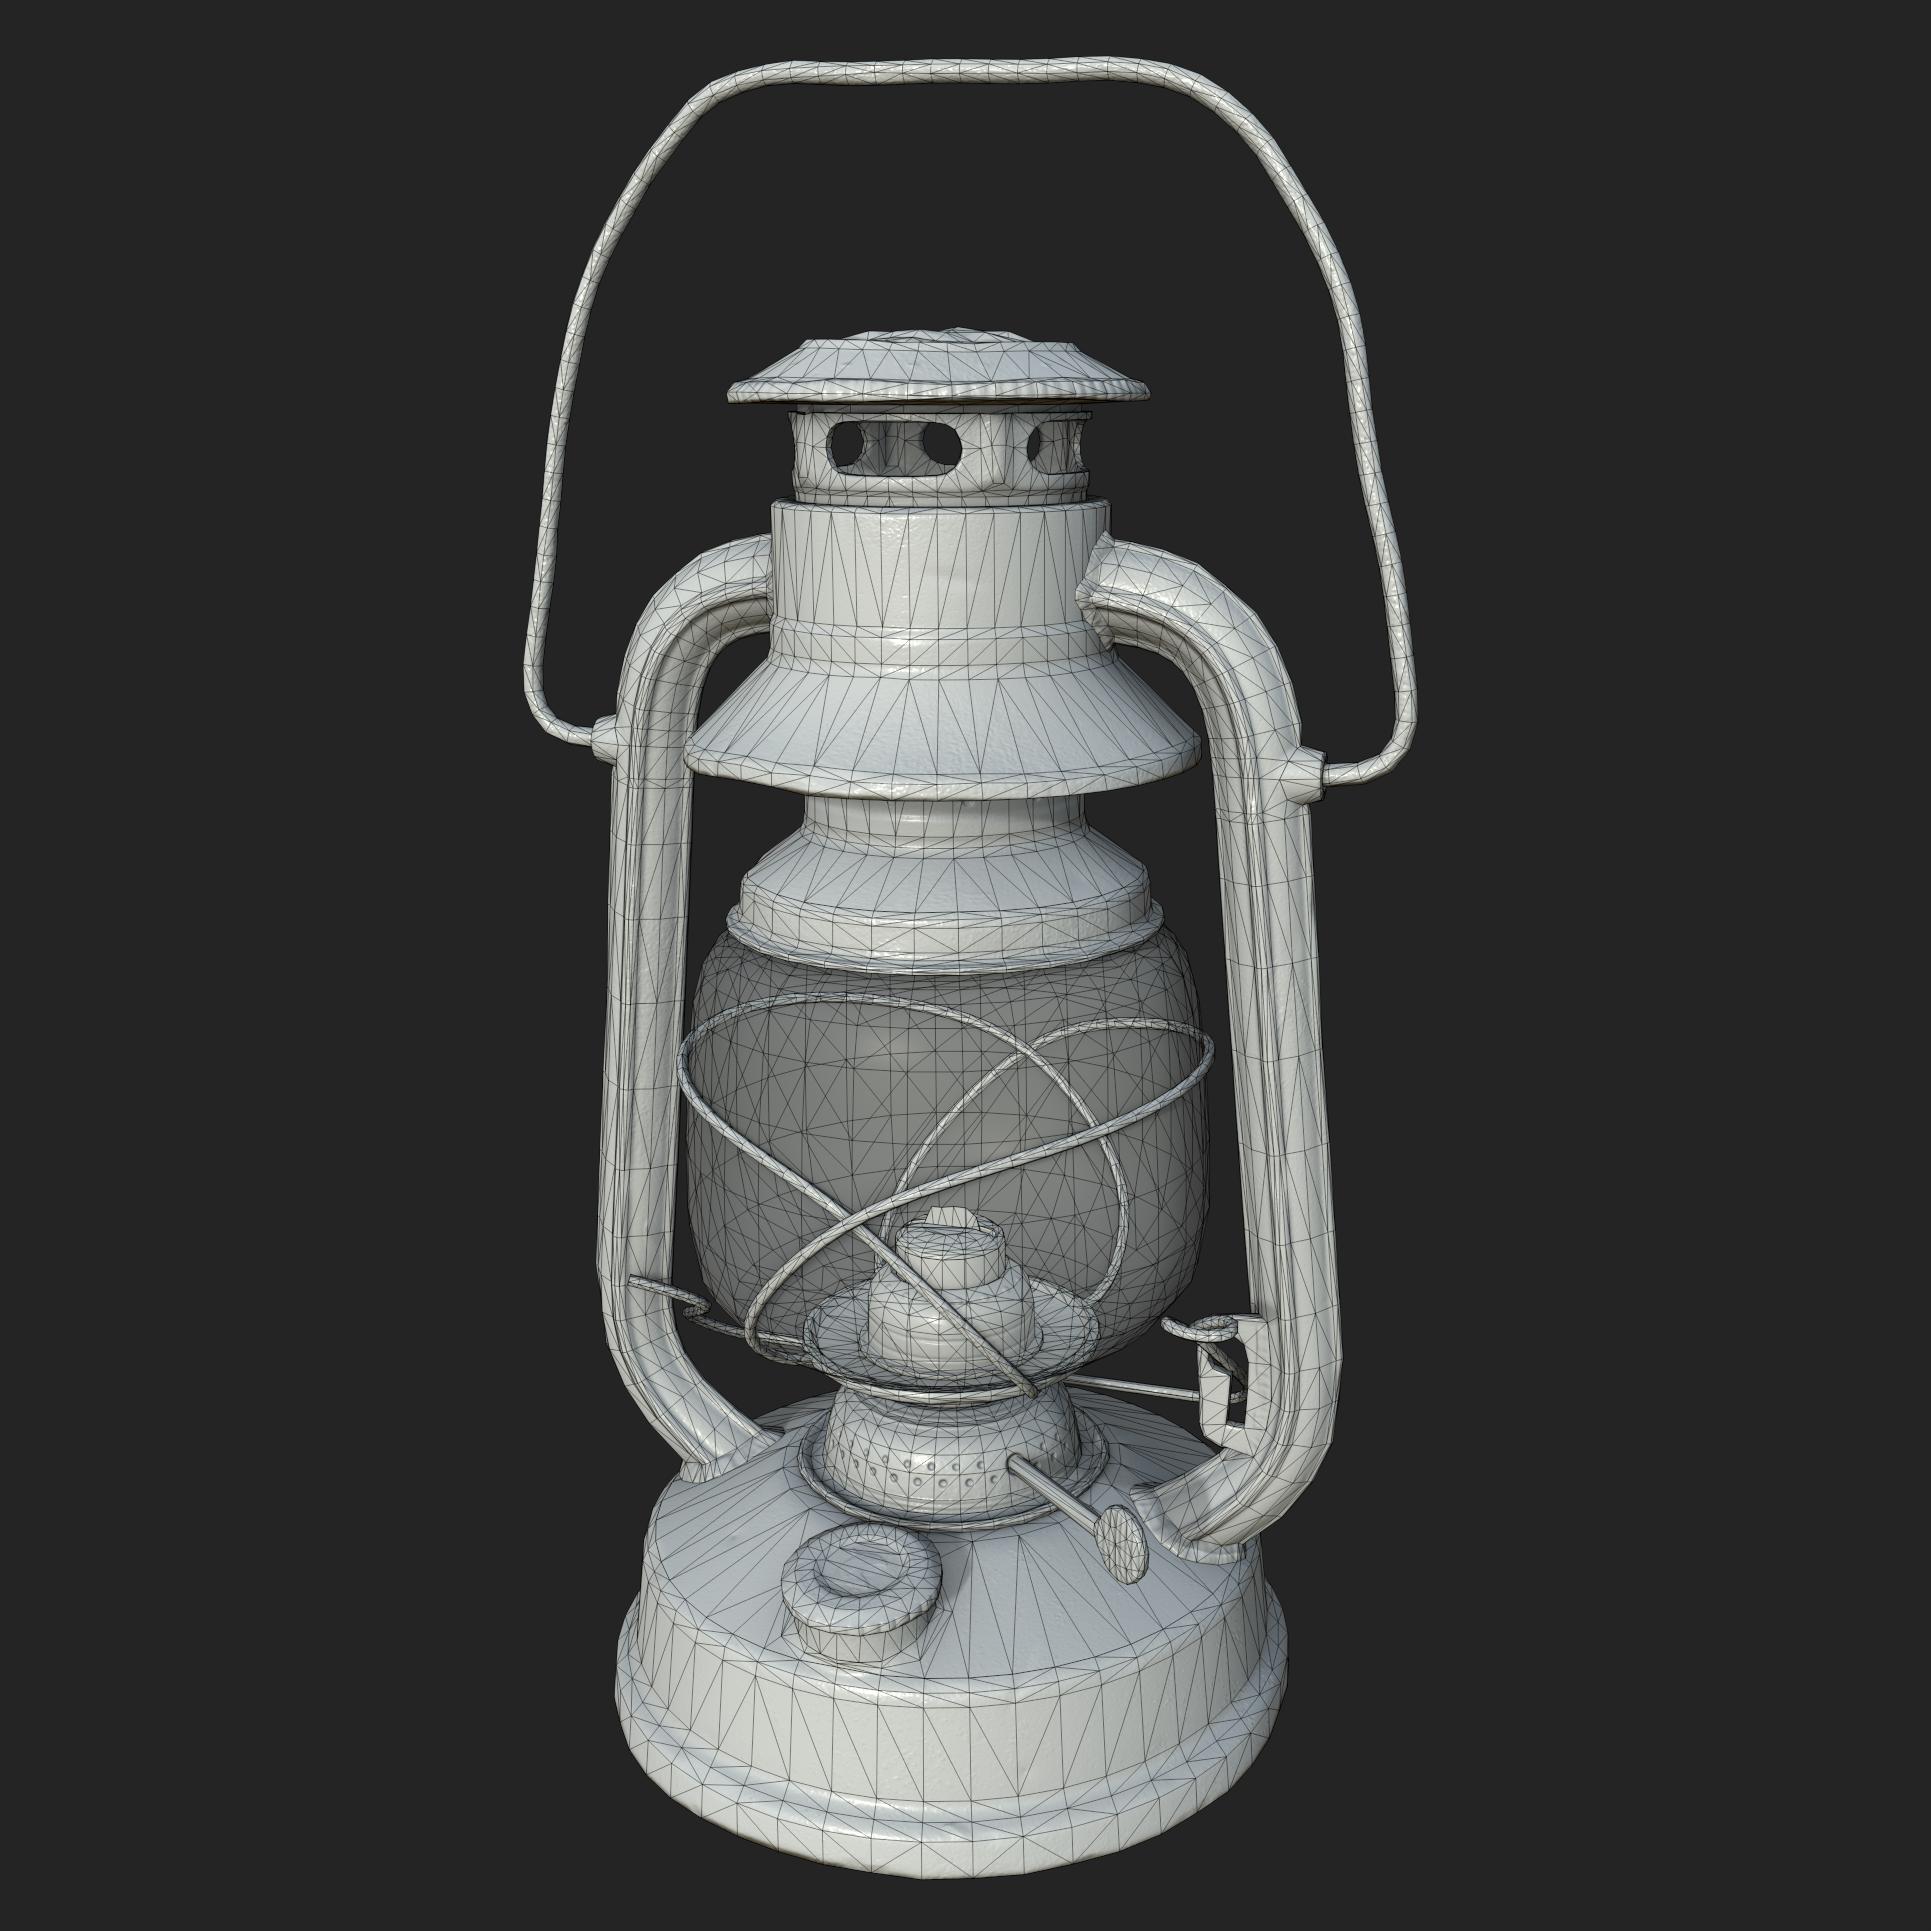 Wireframe render of an oil lamp